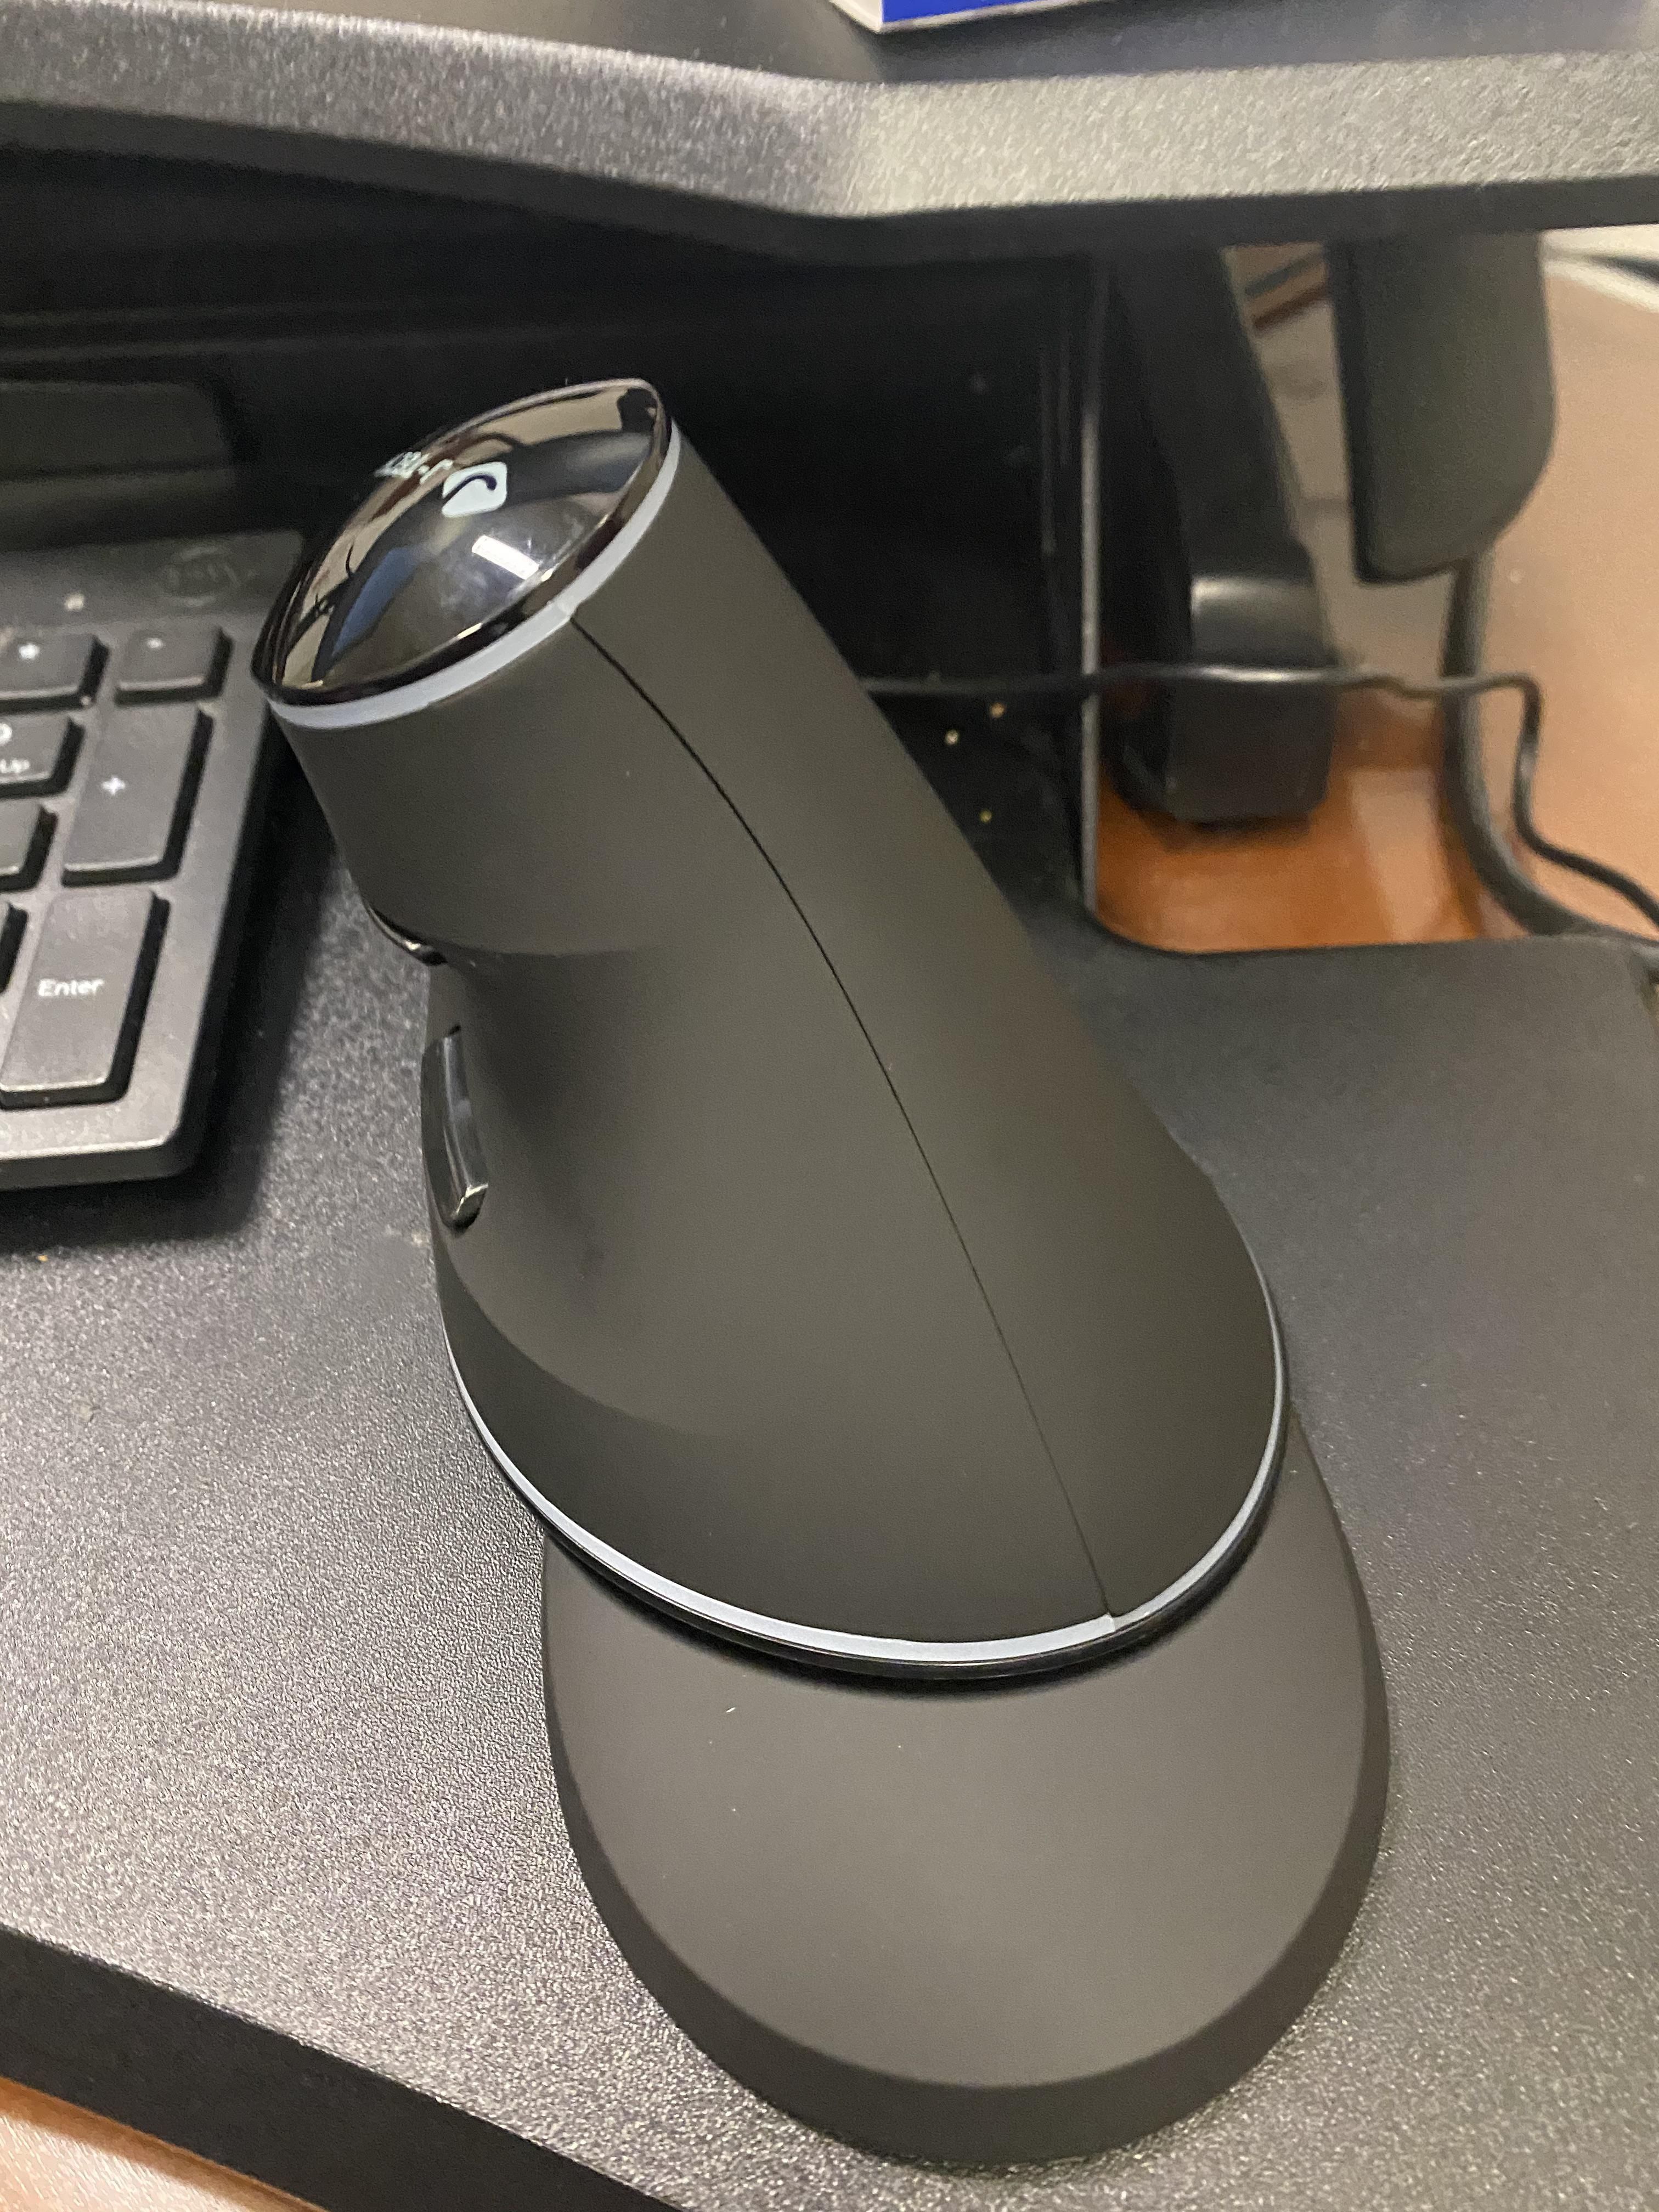 Bought this vertical mouse and my team is making fun of me that it’s too phallic.